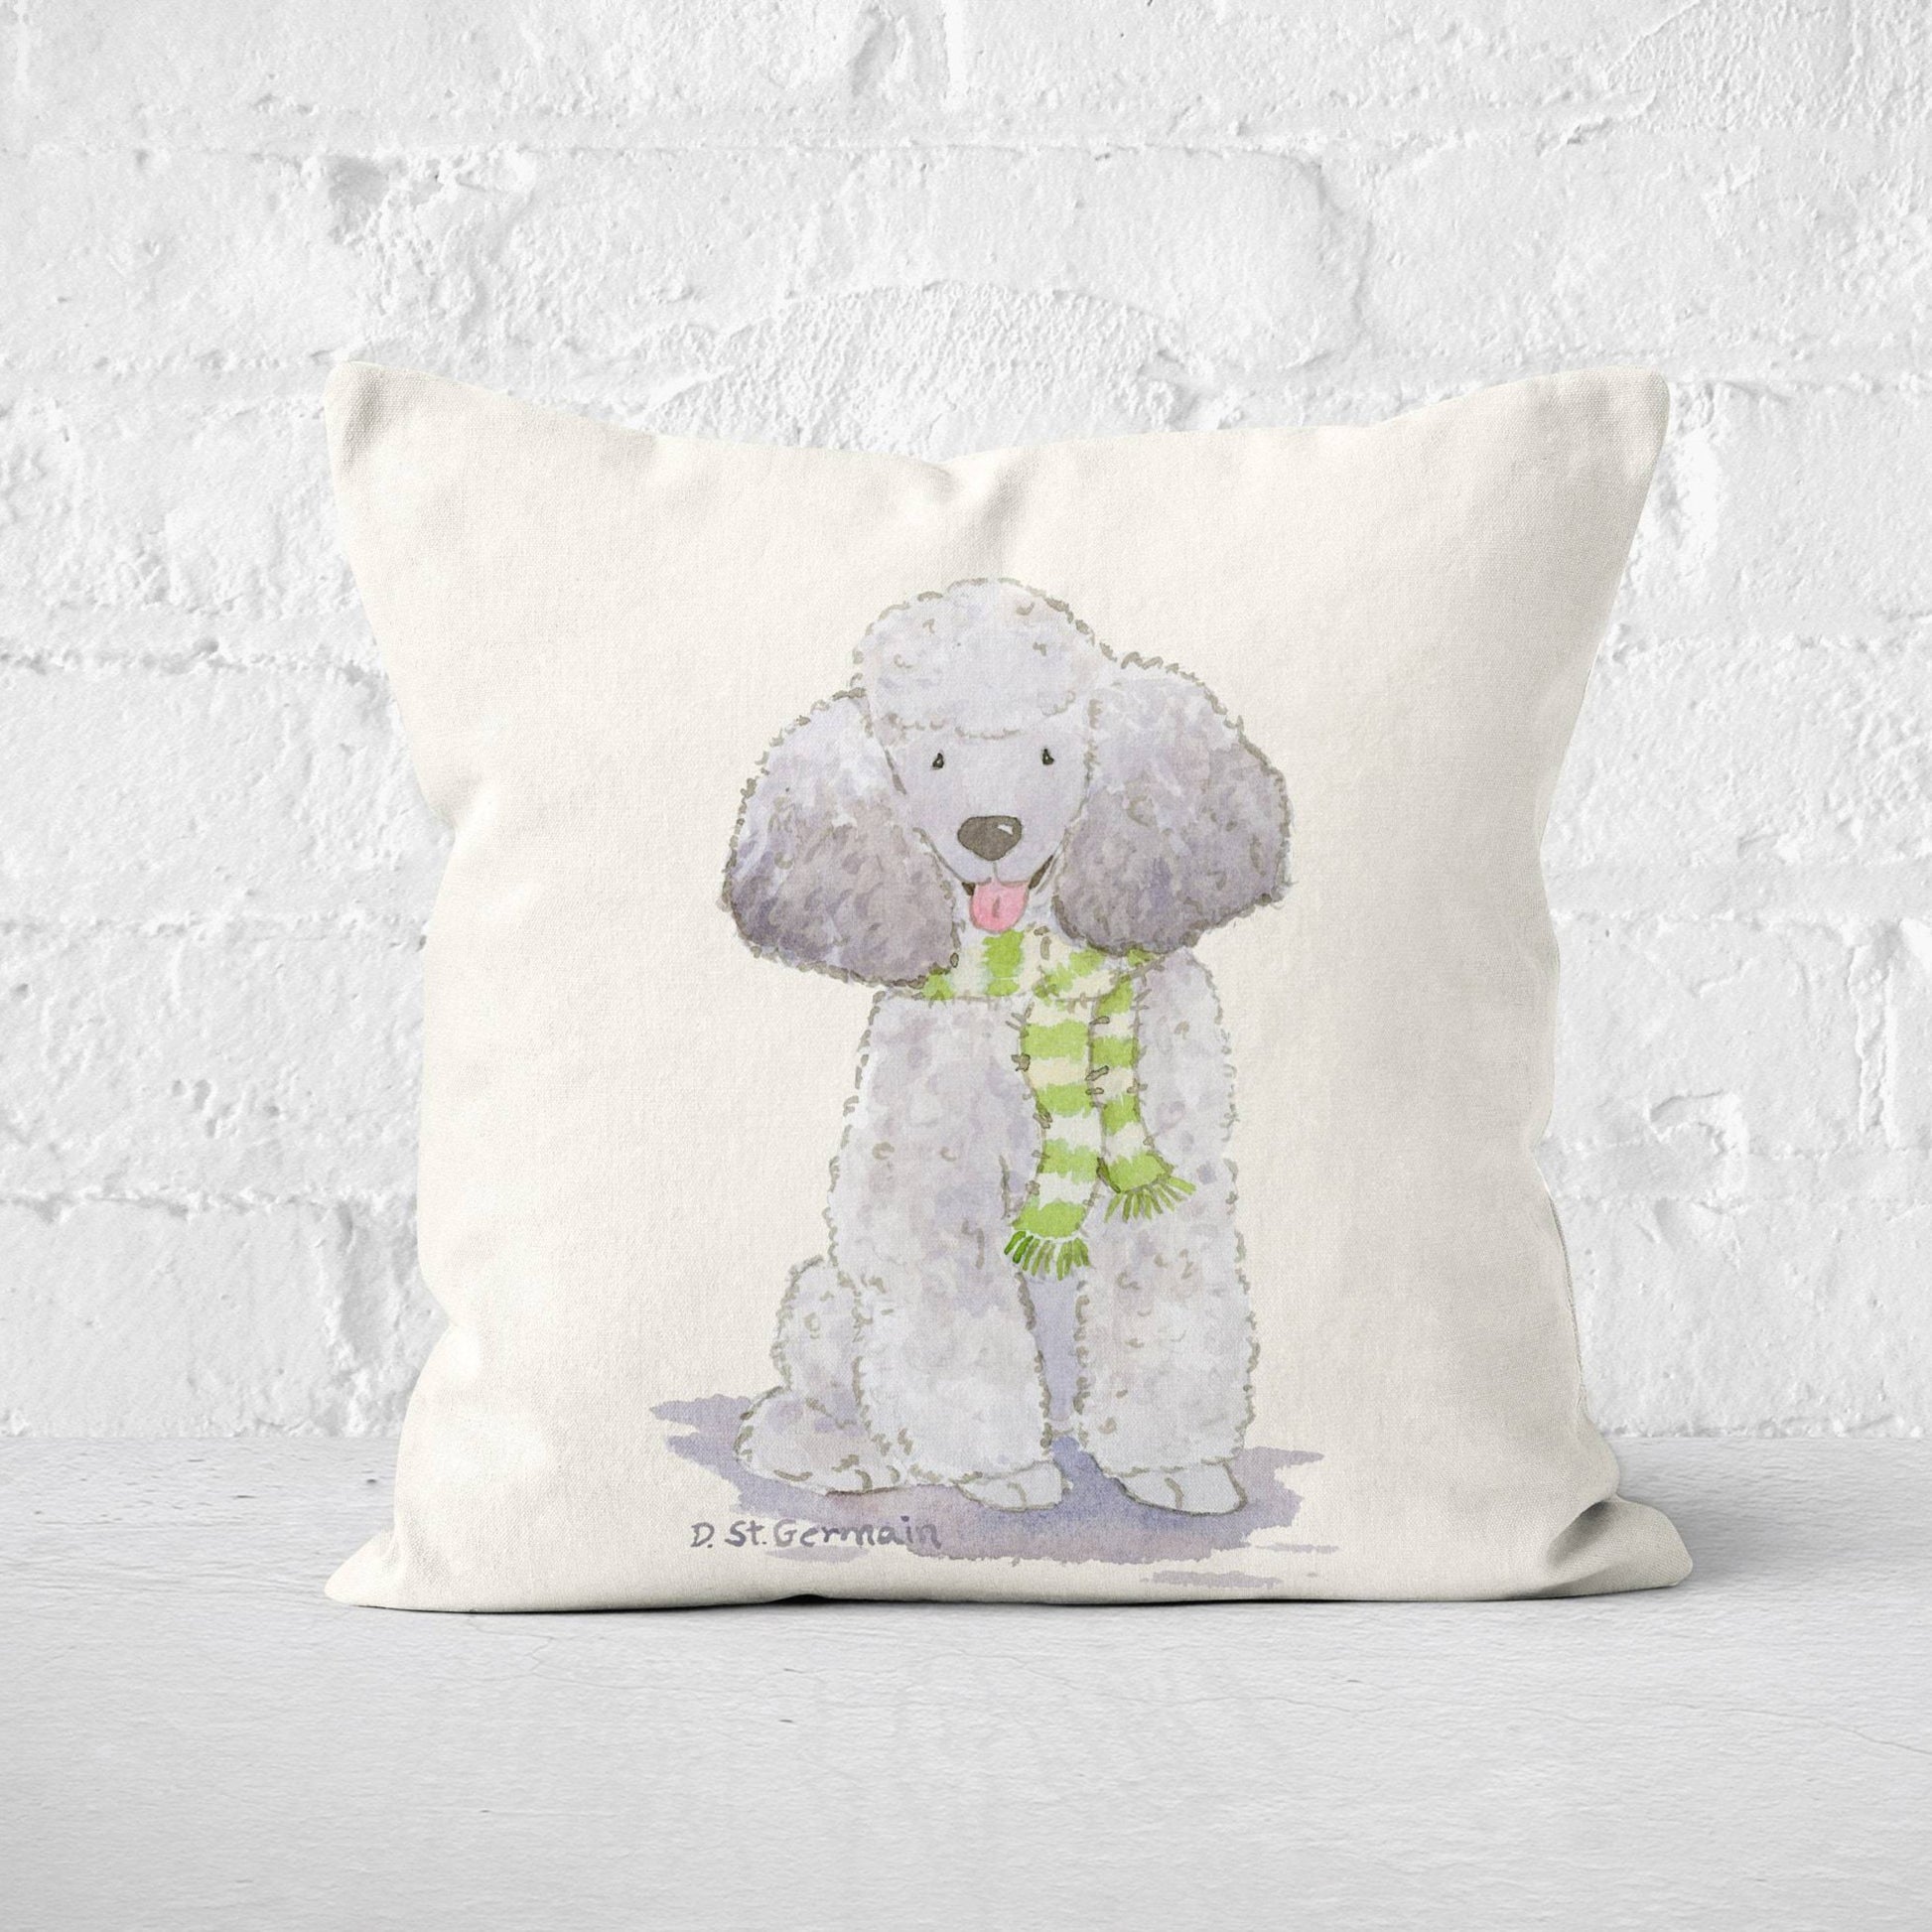 Poodle Holiday Pillow Cover, Christmas Pillow, Poodle Gift, Poodle Christmas Gift, Silver Poodle Gift, Gray Poodle, Holiday Dog Decor